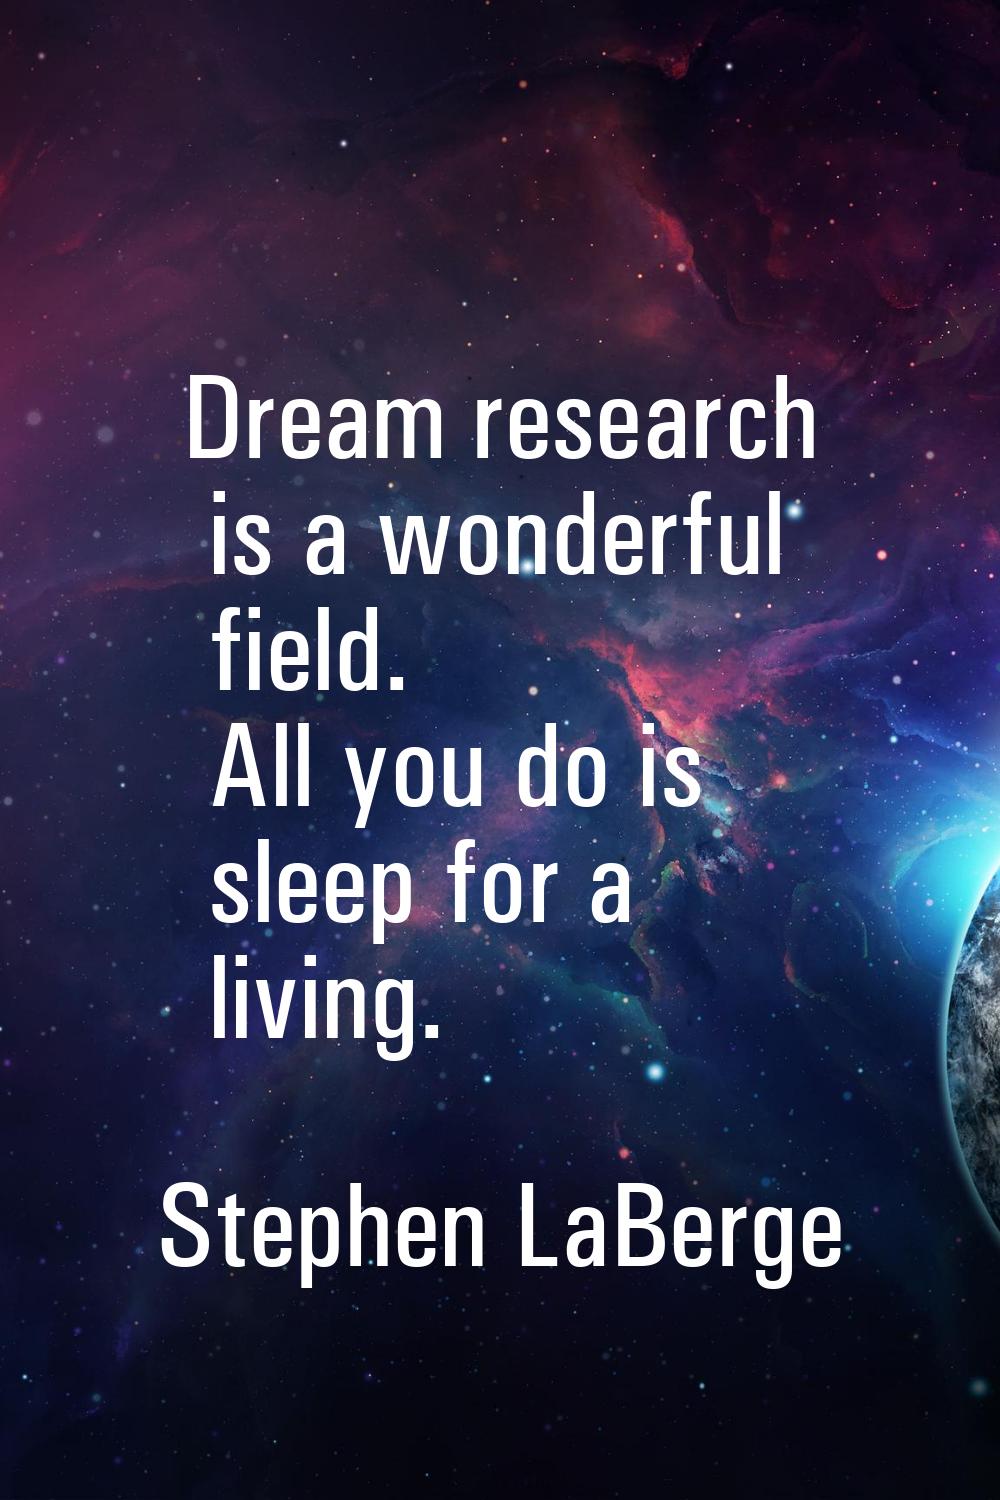 Dream research is a wonderful field. All you do is sleep for a living.